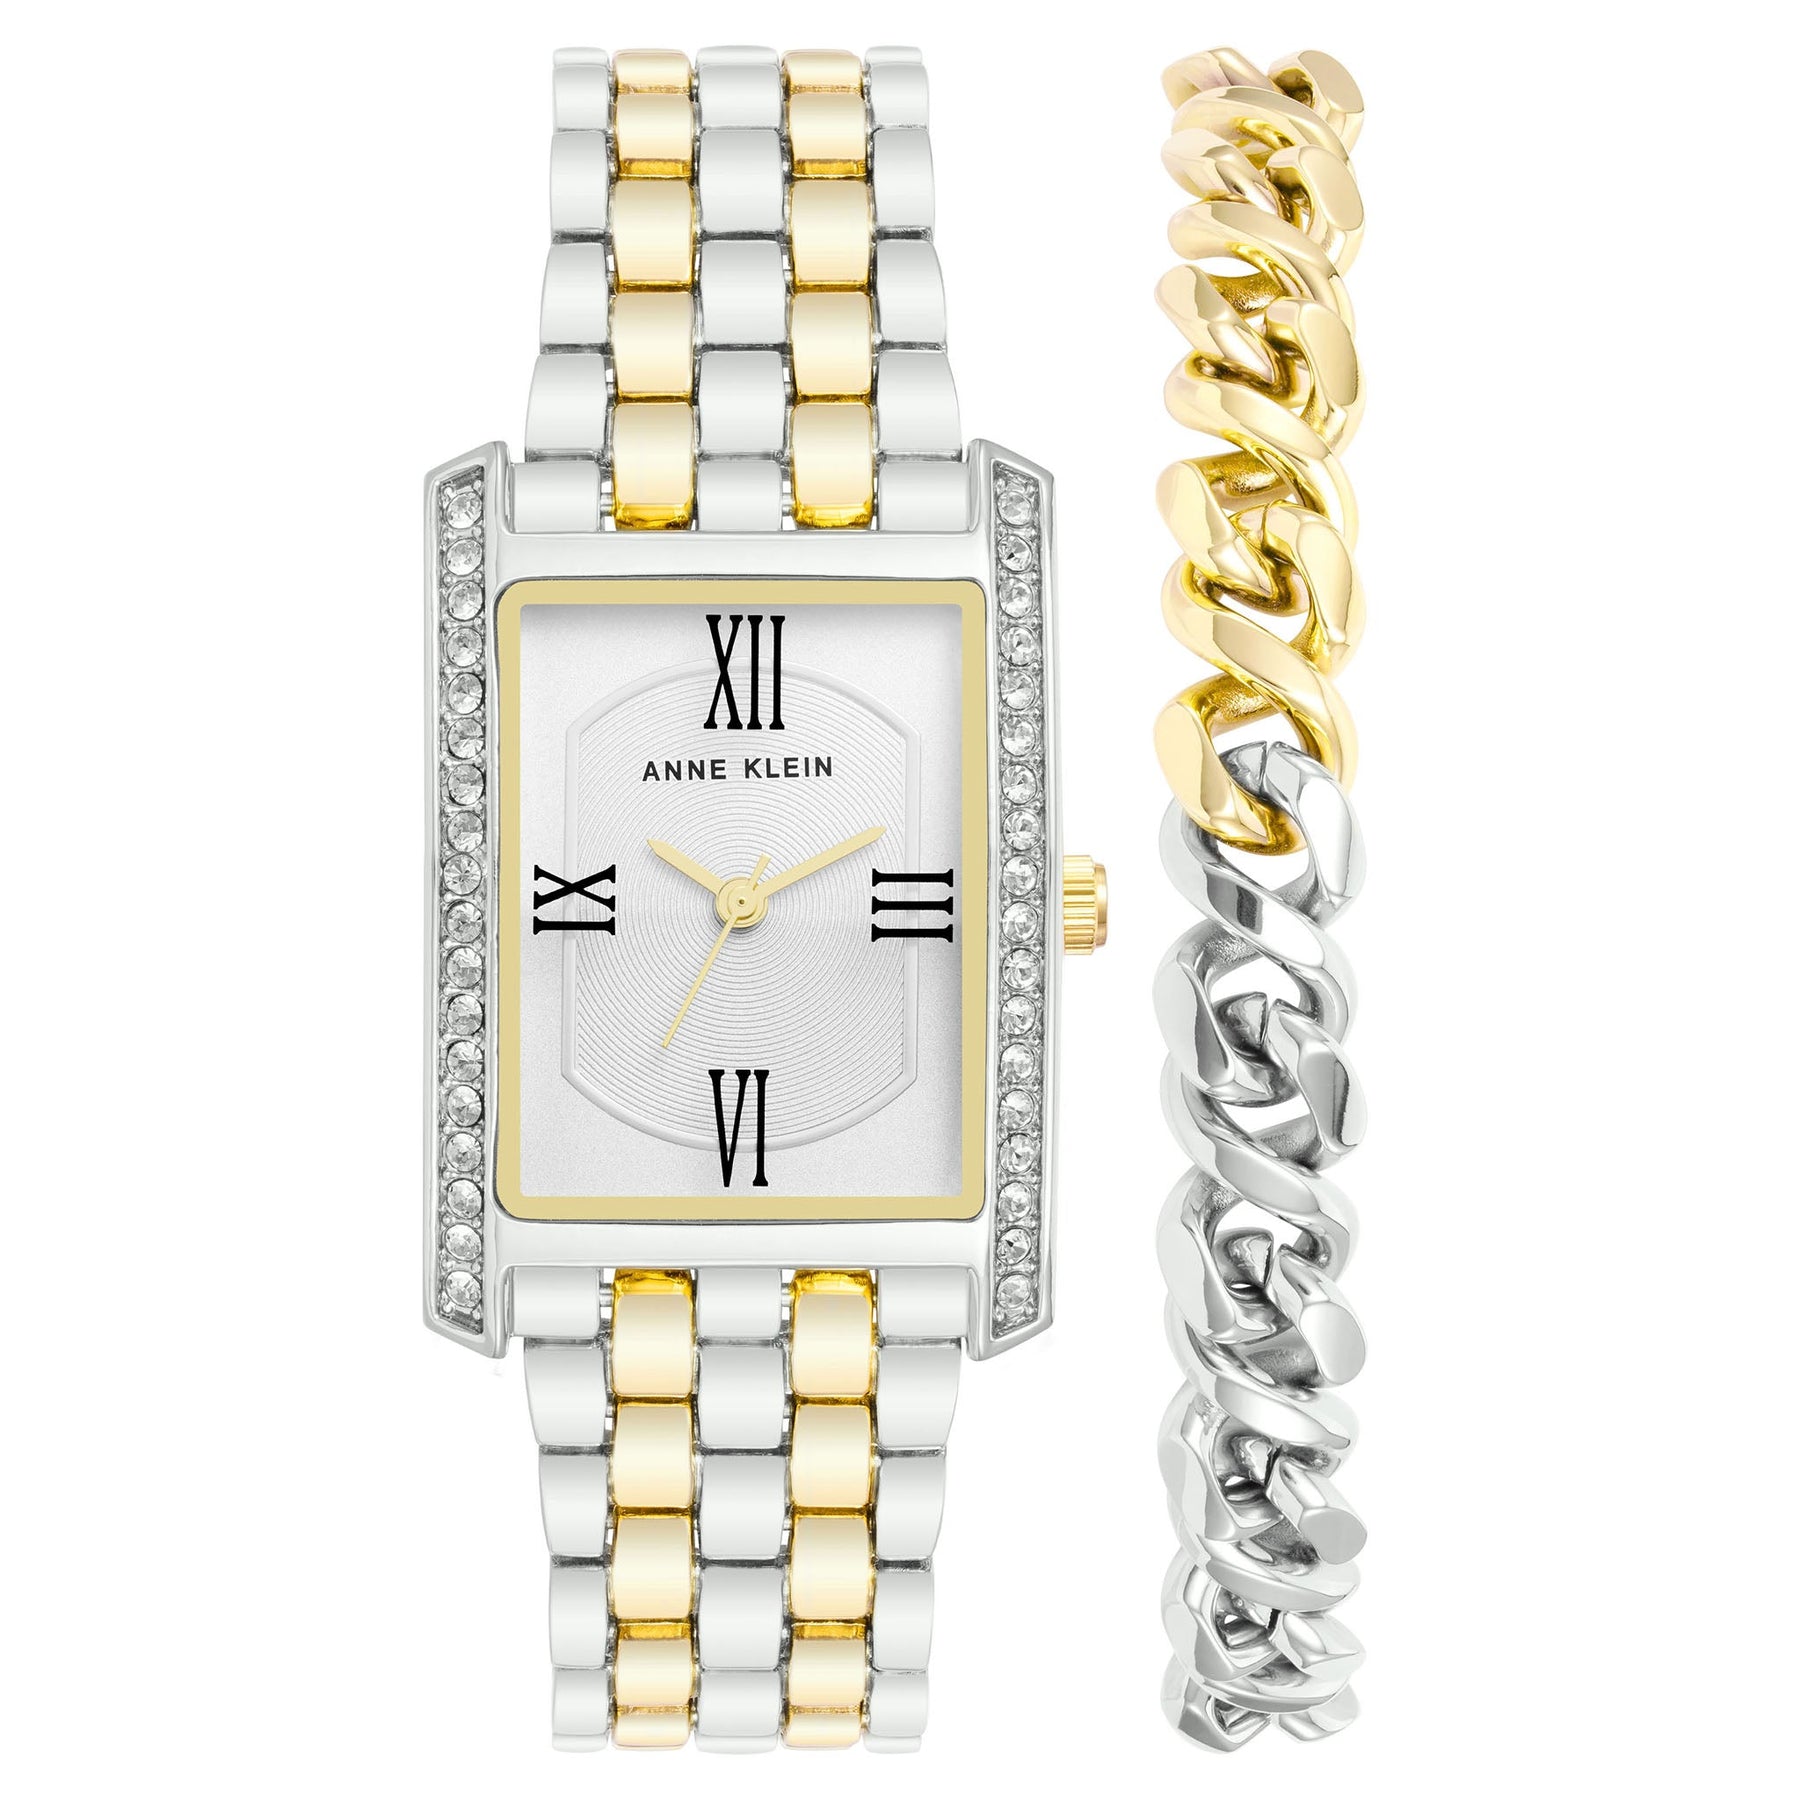 Buy Anne Klein Women's AK/1868GBST Swarovski Crystal Accented Gold-Tone  Bangle Watch and Bracelet Set at Amazon.in